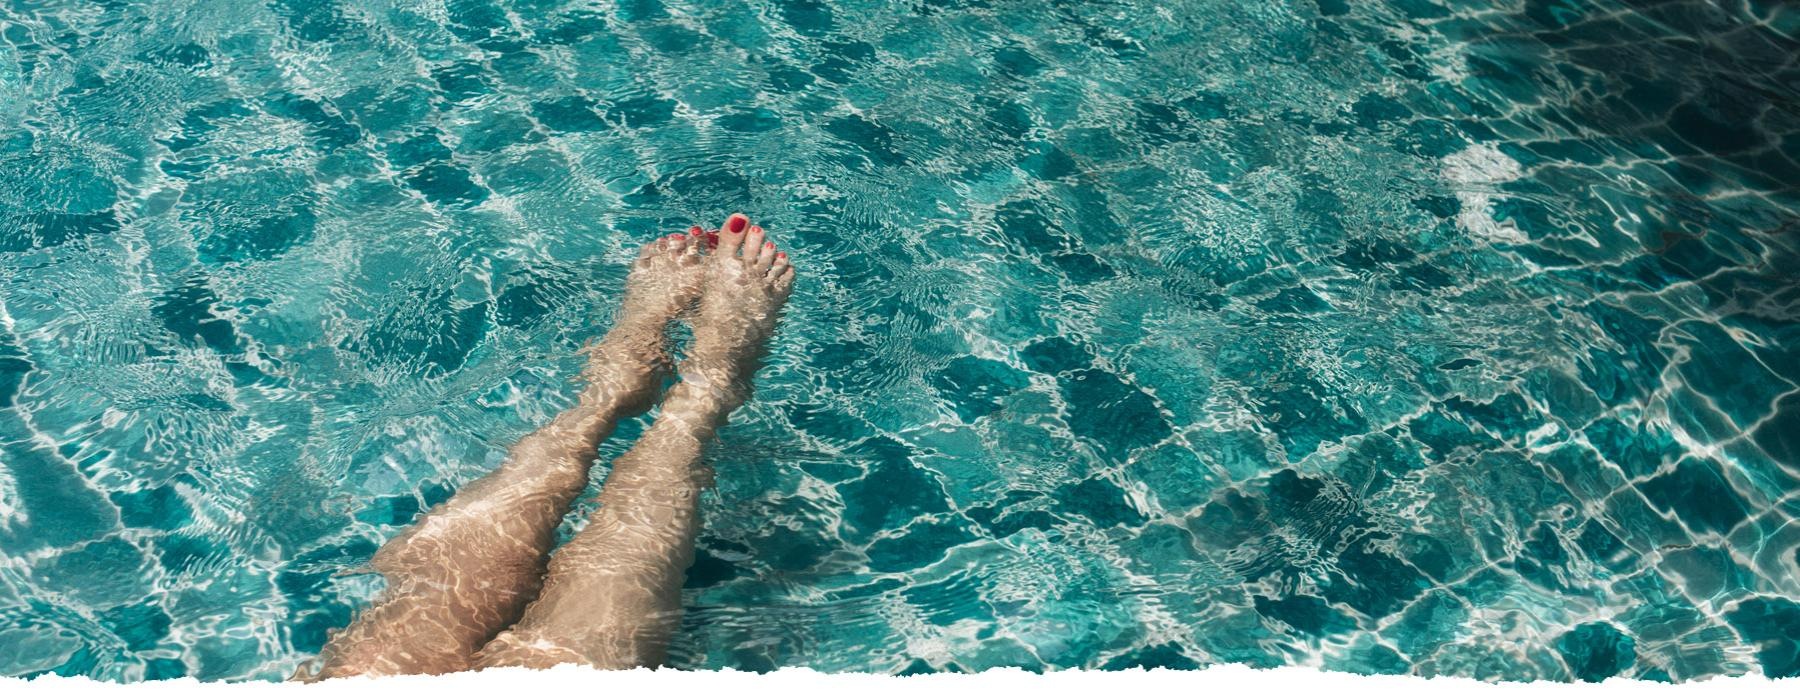 a person's feet in the water